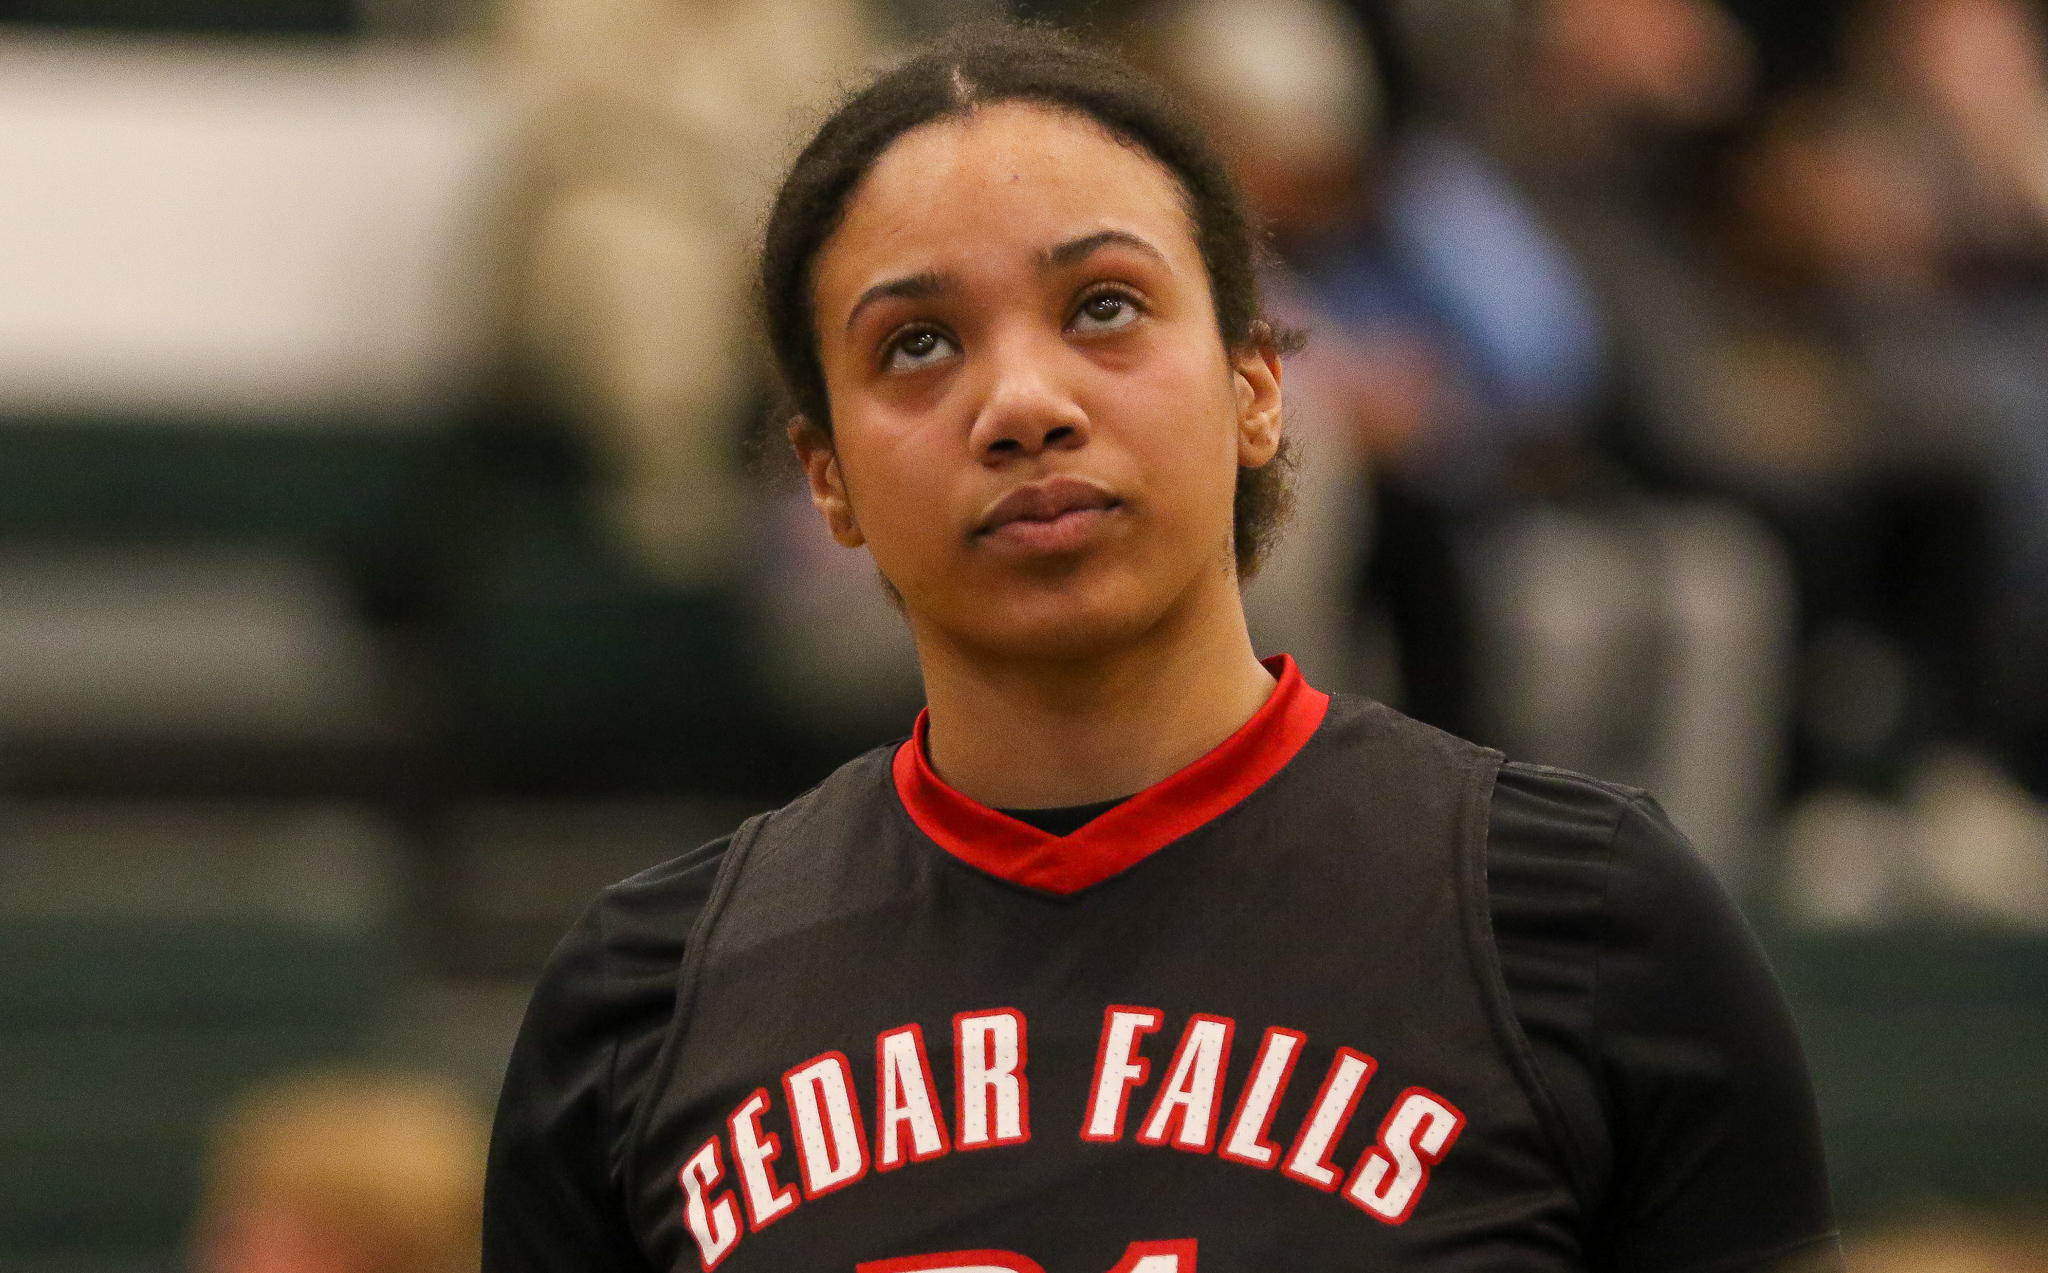 <span class="pn-tooltip pn-player-link">
        <span class="name-pointer">Scouting Report: Cedar Falls at Iowa City West</span>
        <span class="info-box not-prose" style="background: linear-gradient(to bottom, rgba(1,183,255, 0.95) 0%,rgba(1,183,255, 1) 100%)">
            <a href="https://prepgirlshoops.com/2023/01/scouting-report-cedar-falls-at-iowa-city-west/" class="link-wrap">
                                    <span class="player-img"><img src="https://prepgirlshoops.com/wp-content/uploads/sites/4/2023/01/137A0313.jpg?w=150&h=150&crop=1" alt="Scouting Report: Cedar Falls at Iowa City West"></span>
                
                <span class="player-details">
                    <span class="first-name">Scouting</span>
                    <span class="last-name">Report: Cedar Falls at Iowa City West</span>
                    <span class="measurables">
                                            </span>
                                    </span>
                <span class="player-rank">
                                                        </span>
                                    <span class="state-abbr"></span>
                            </a>

            
        </span>
    </span>
 